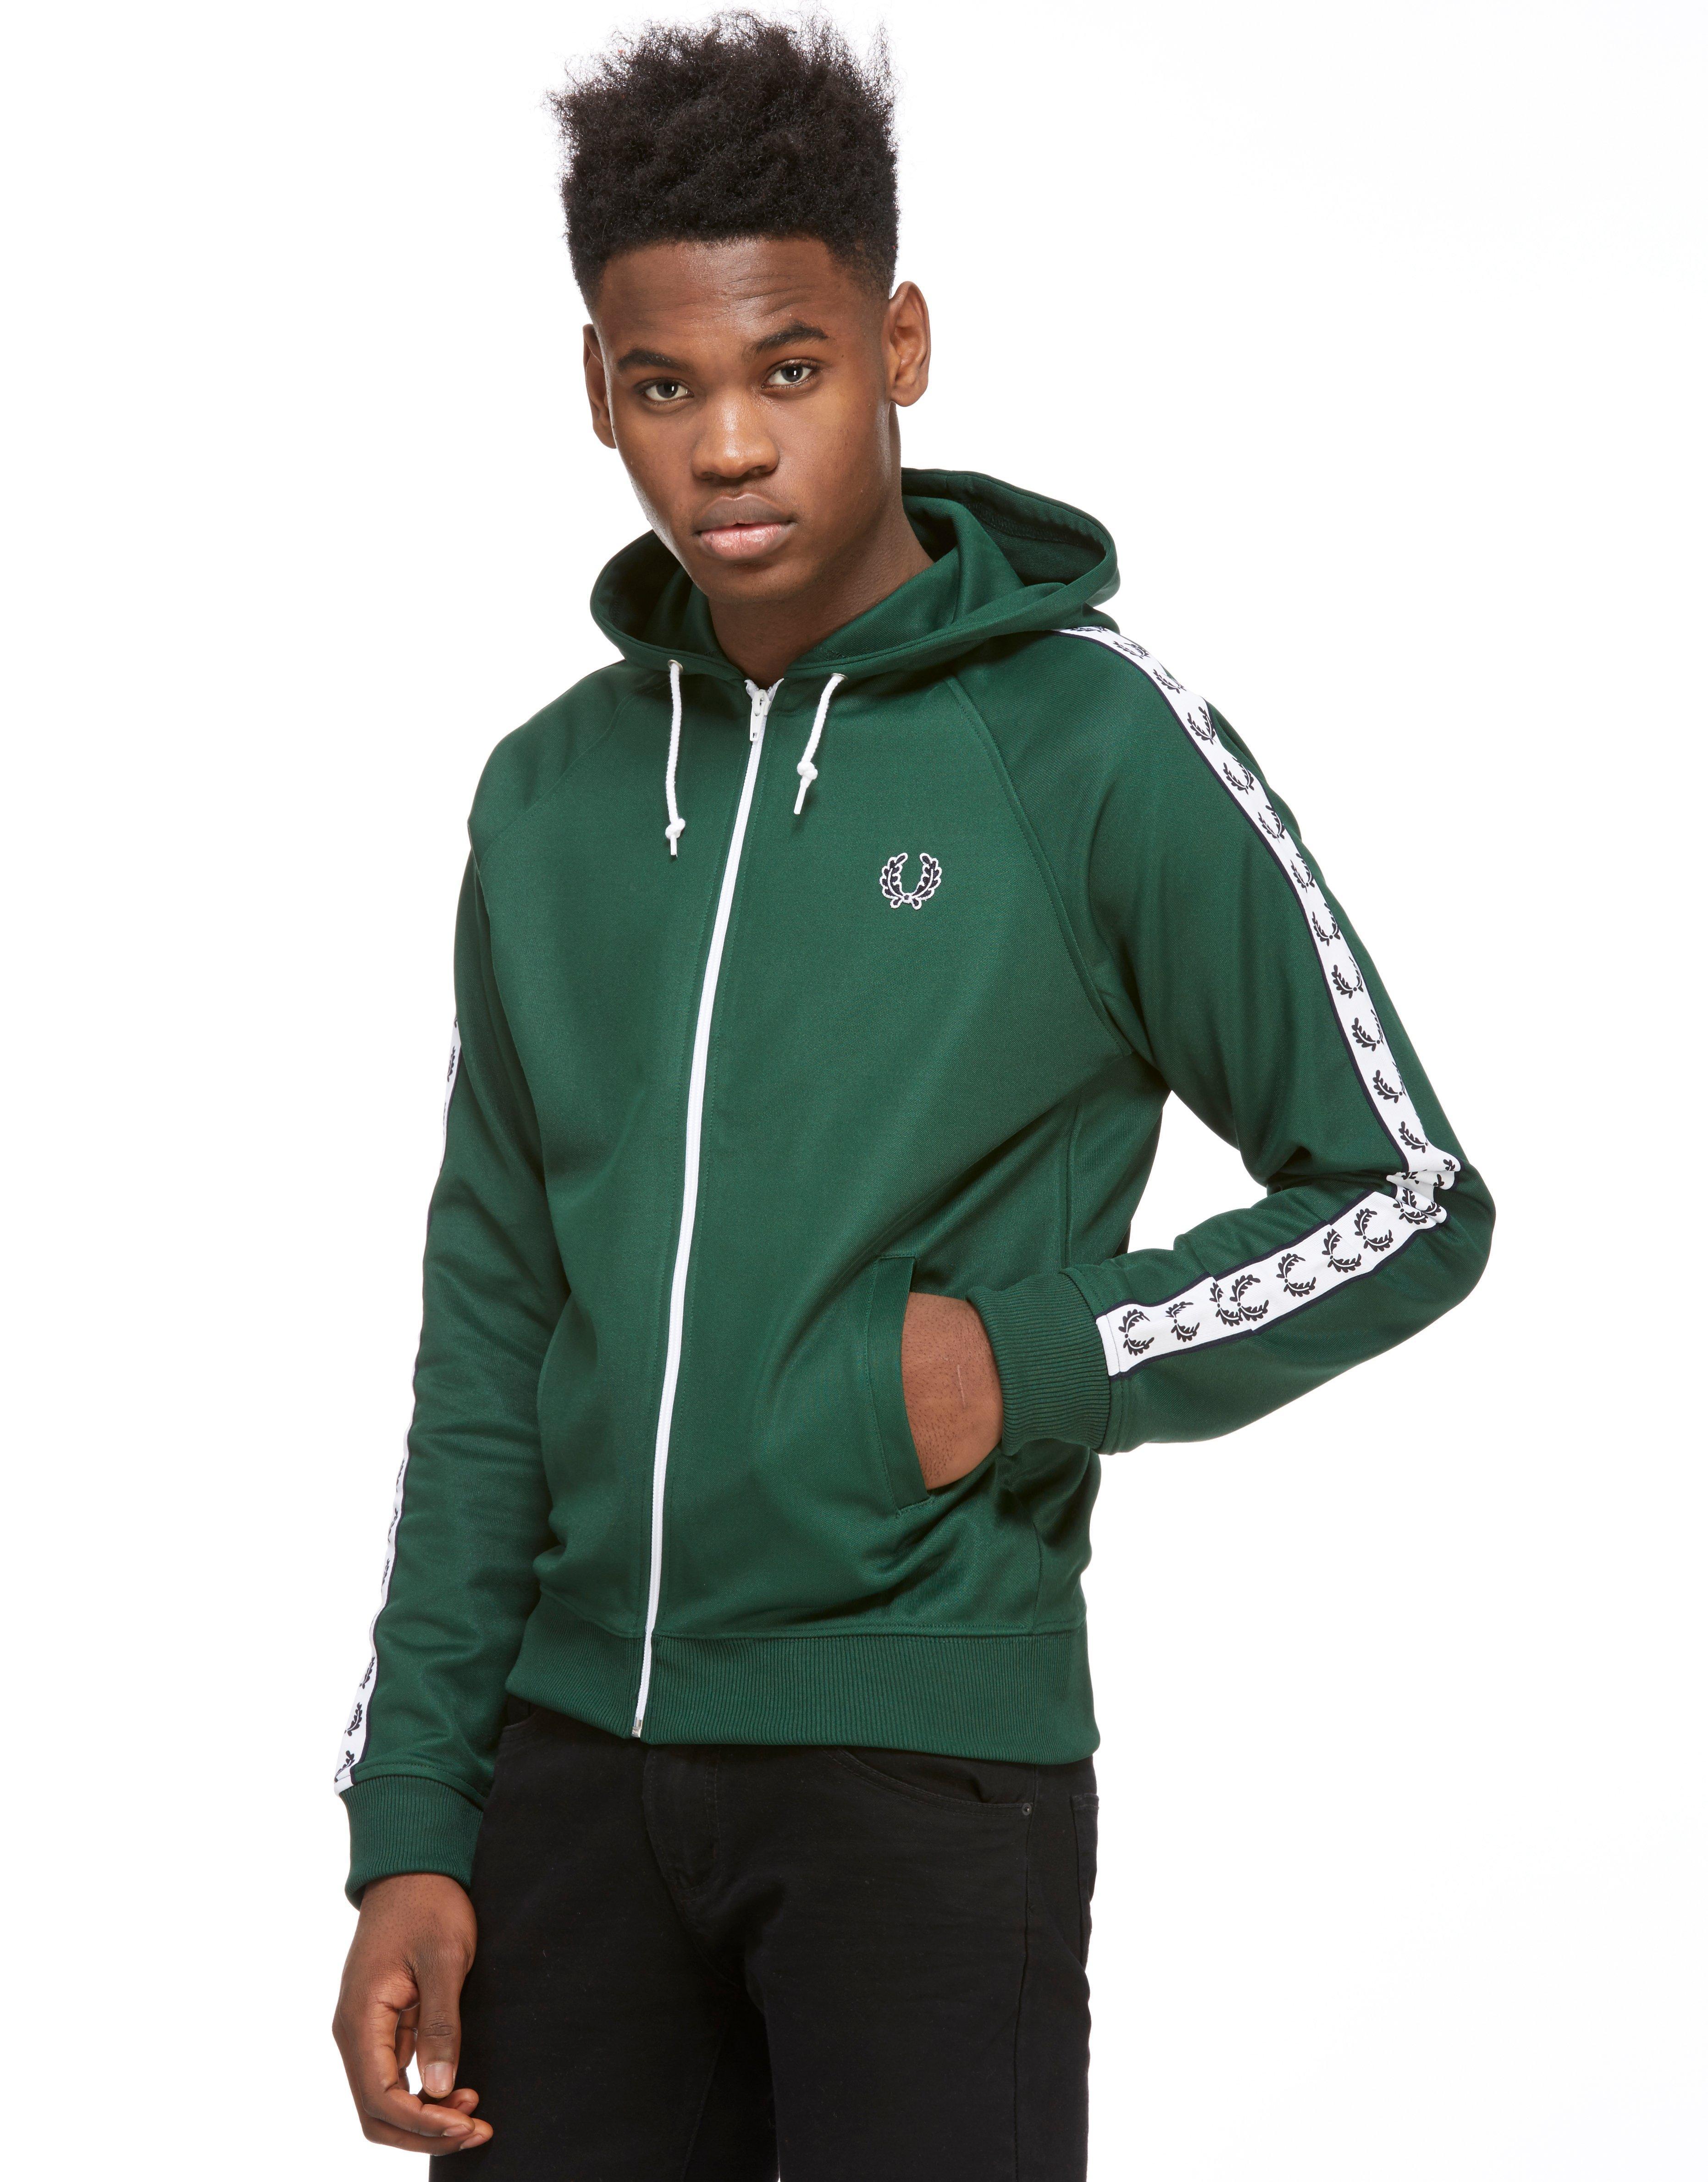 Fred Perry Cotton Tape Hoody in Green for Men - Lyst